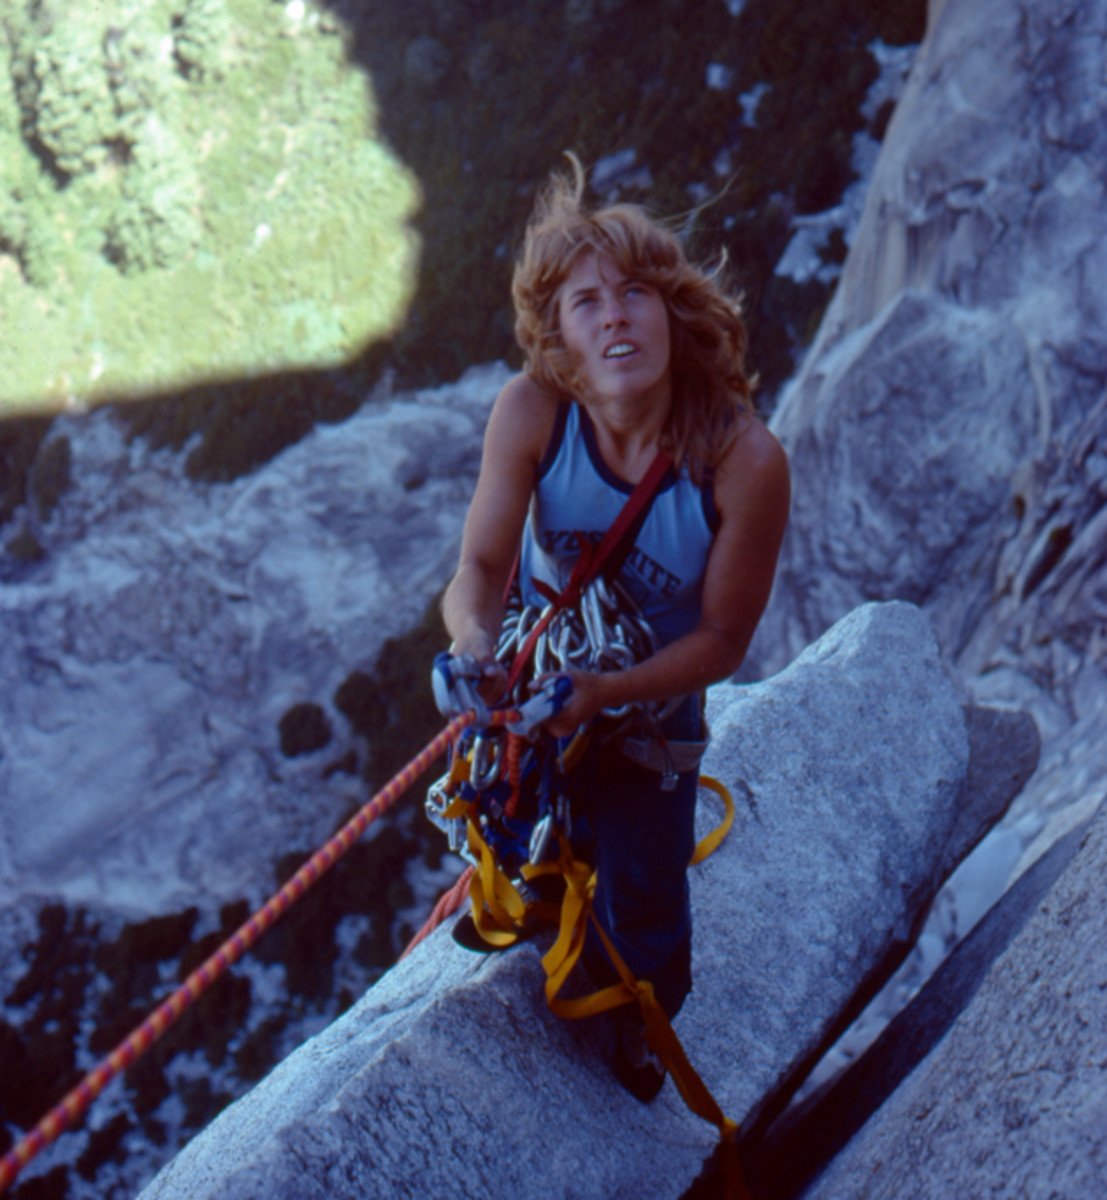 Hill made the first free ascent of The Nose on El Capitan in 1993.  